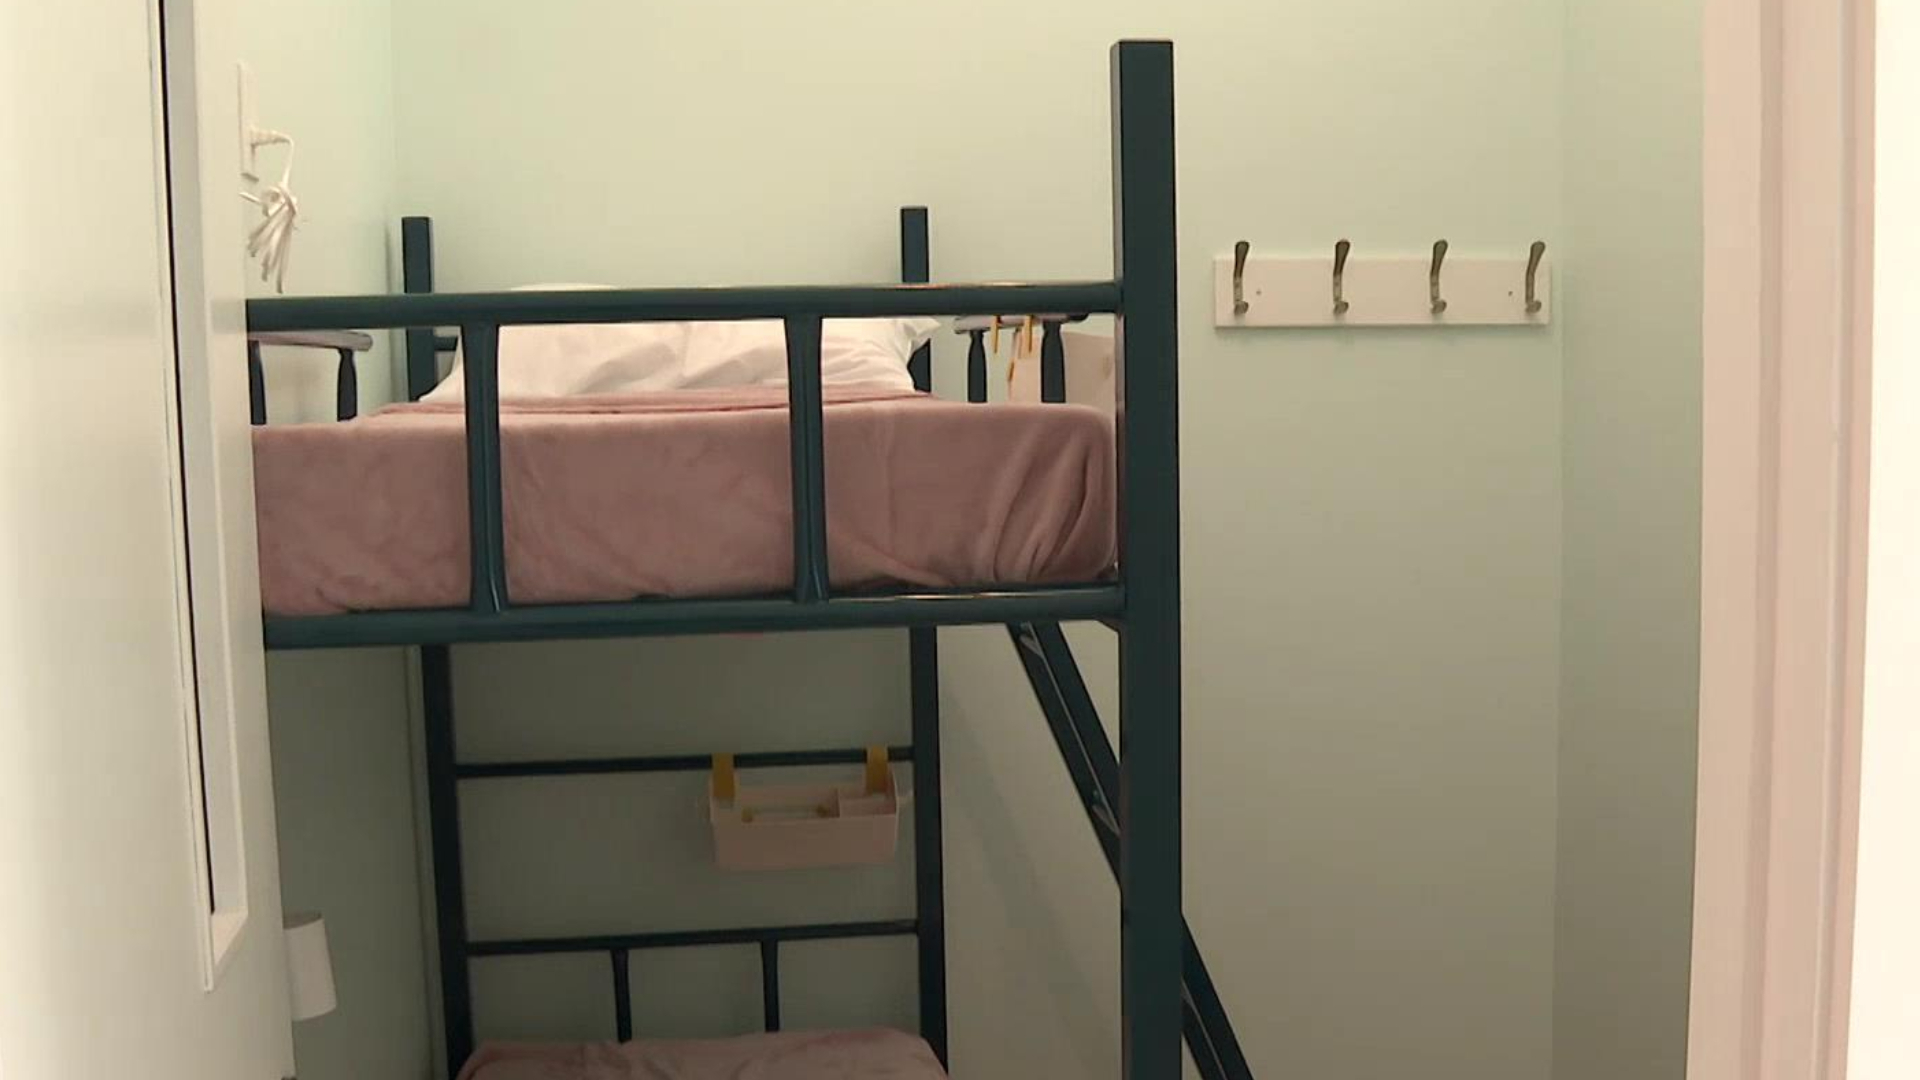 Thousands turned away amid women’s shelter shortage in Quebec